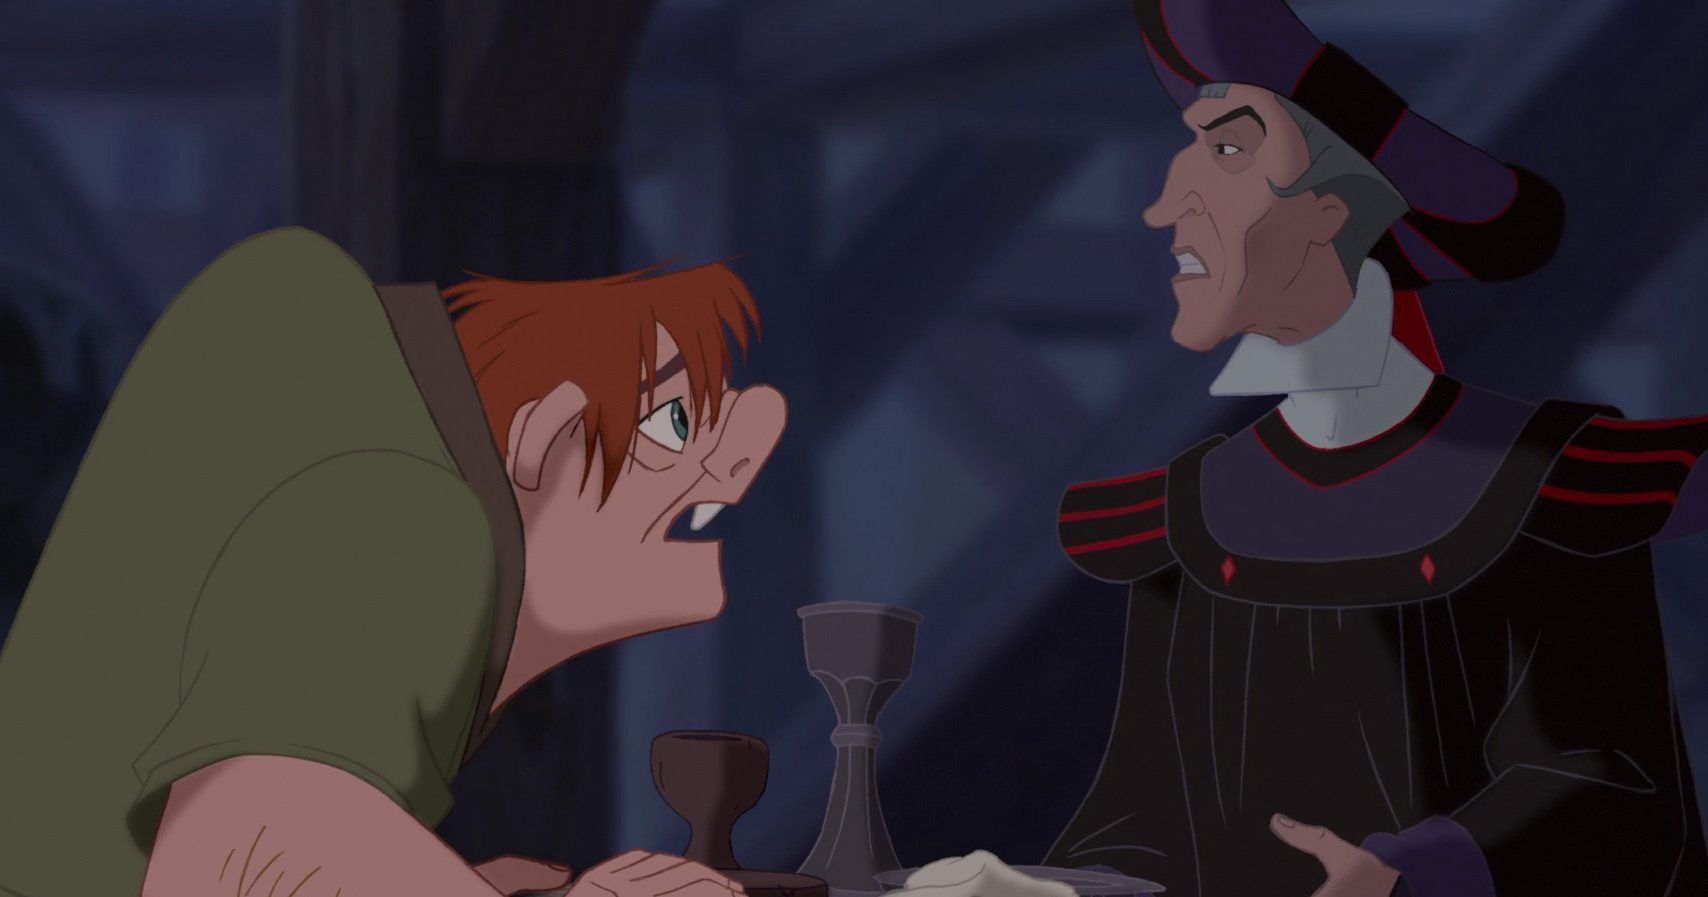 2. The Hunchback of Notre Dame: This is an unlikely approach for a Disney movie.  Judge Claude is the meanest Disney villain, fueled by lust.  The music of the Hunchback is also darker than that of other Disney films.  There are still some funny moments.  The ending has also been rewritten, but it's hard to thoroughly clean up such a dark story.